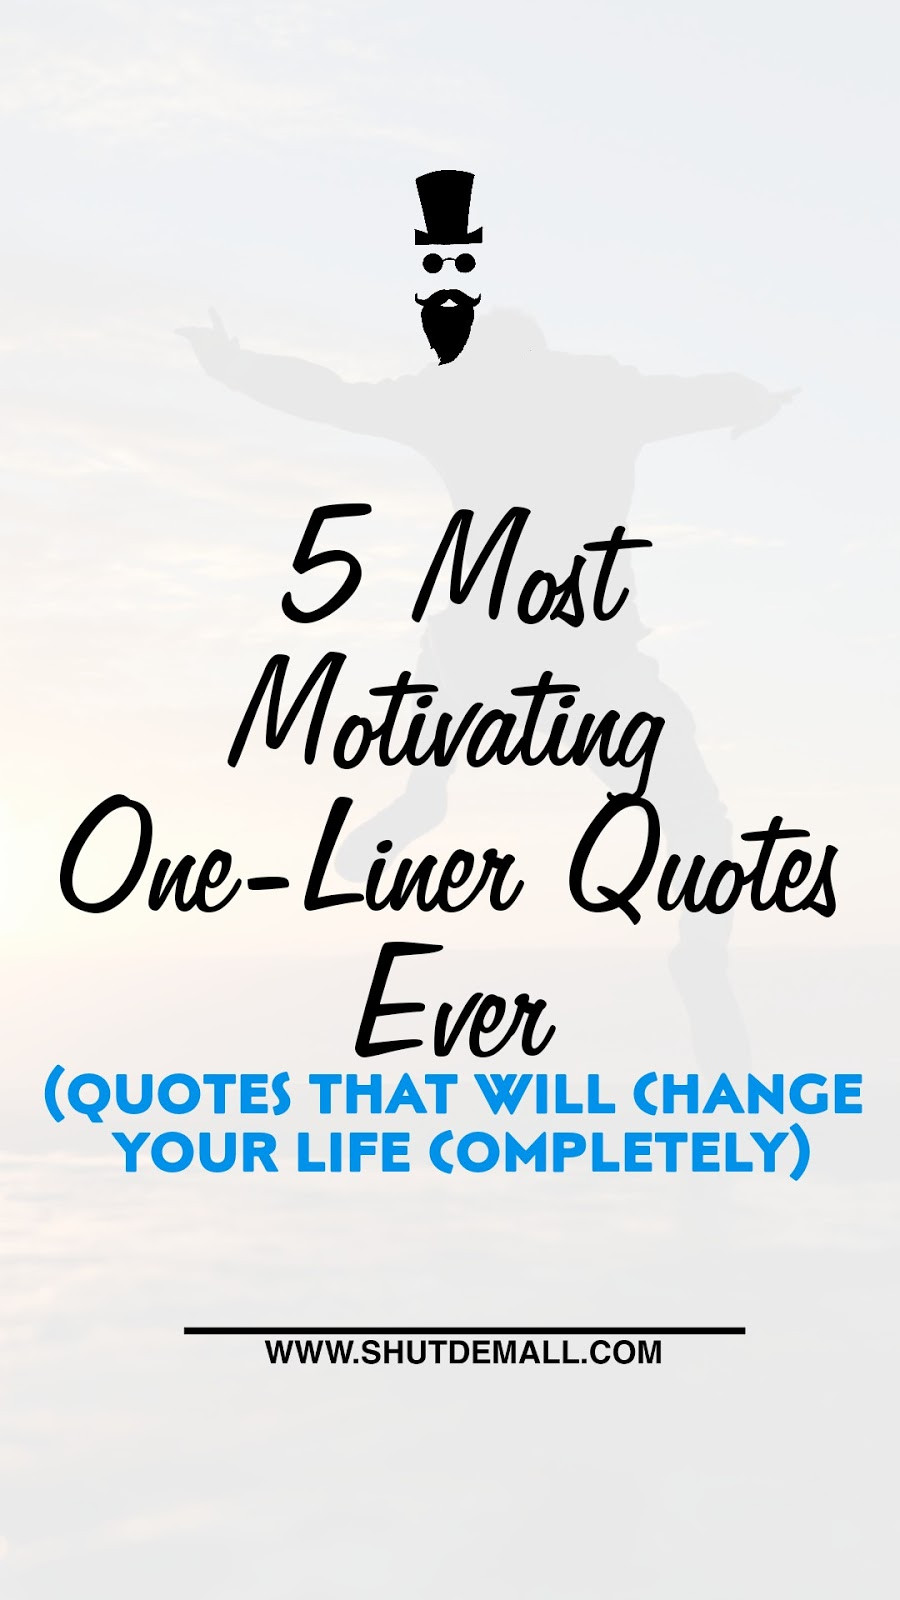 One Line Motivational Quote
 Most Motivating e Liner Quotes Ever